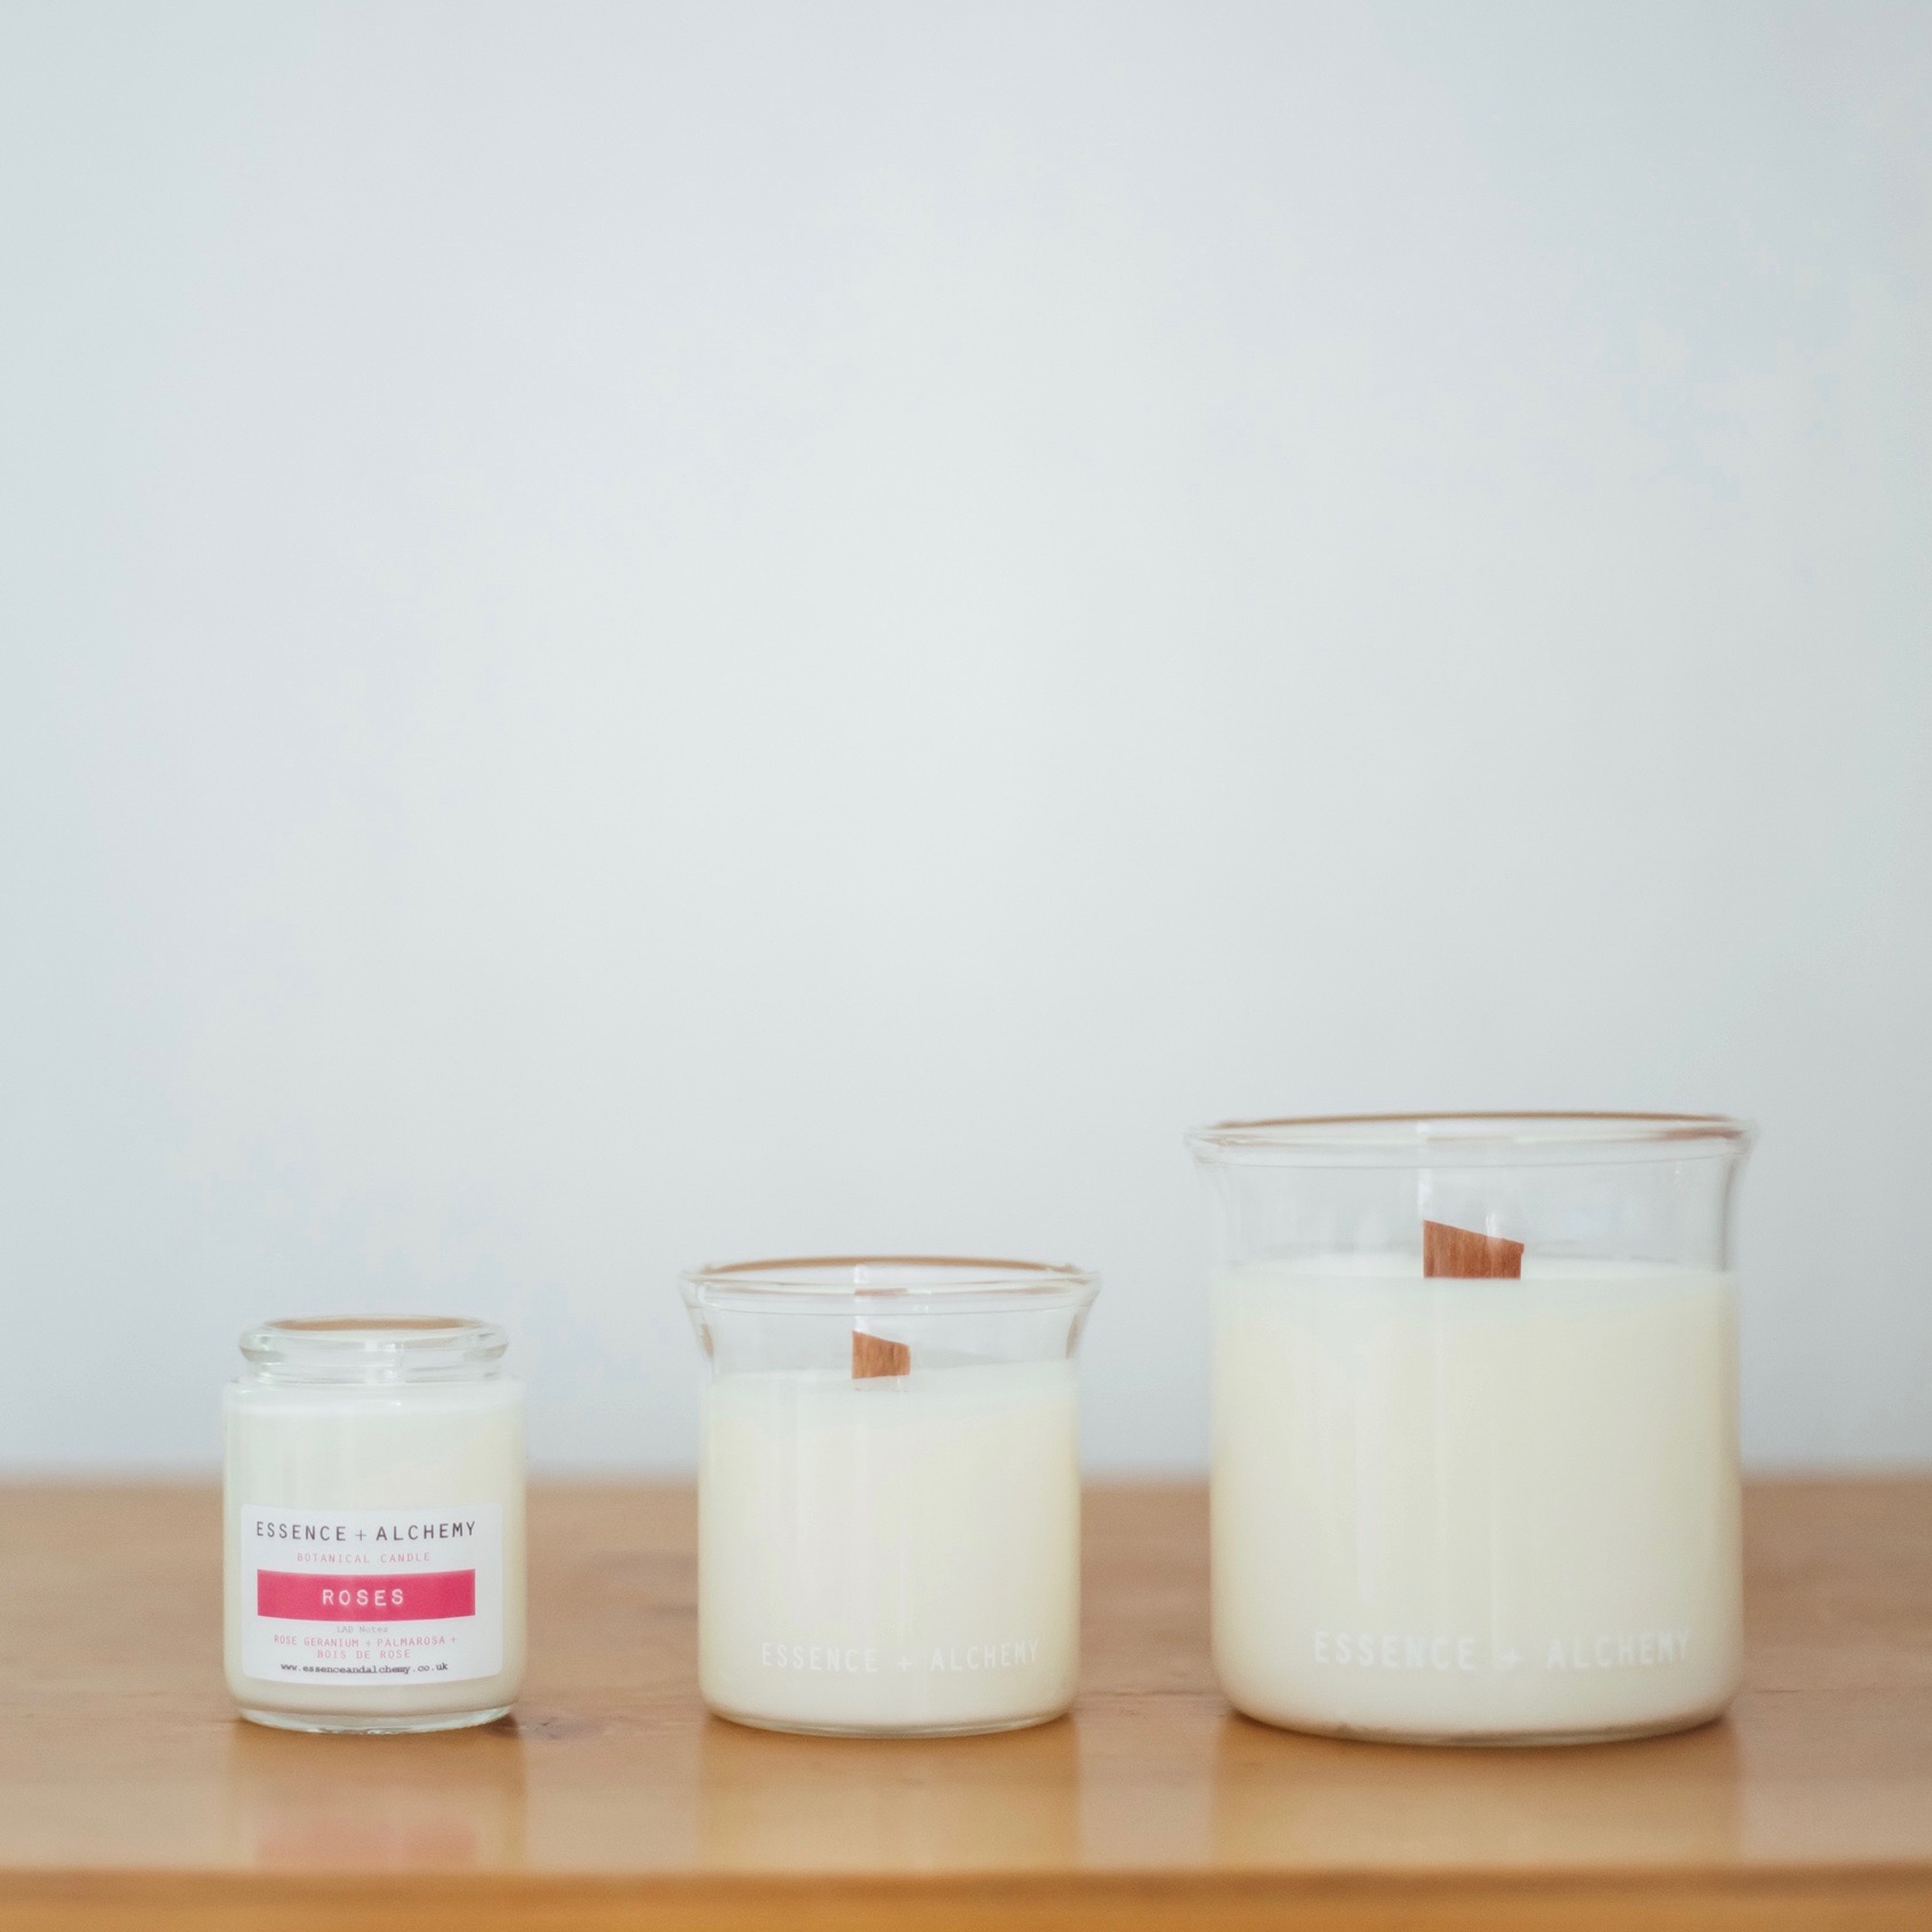 Essence and Alchemy 3 Candle Sizes copy.jpg